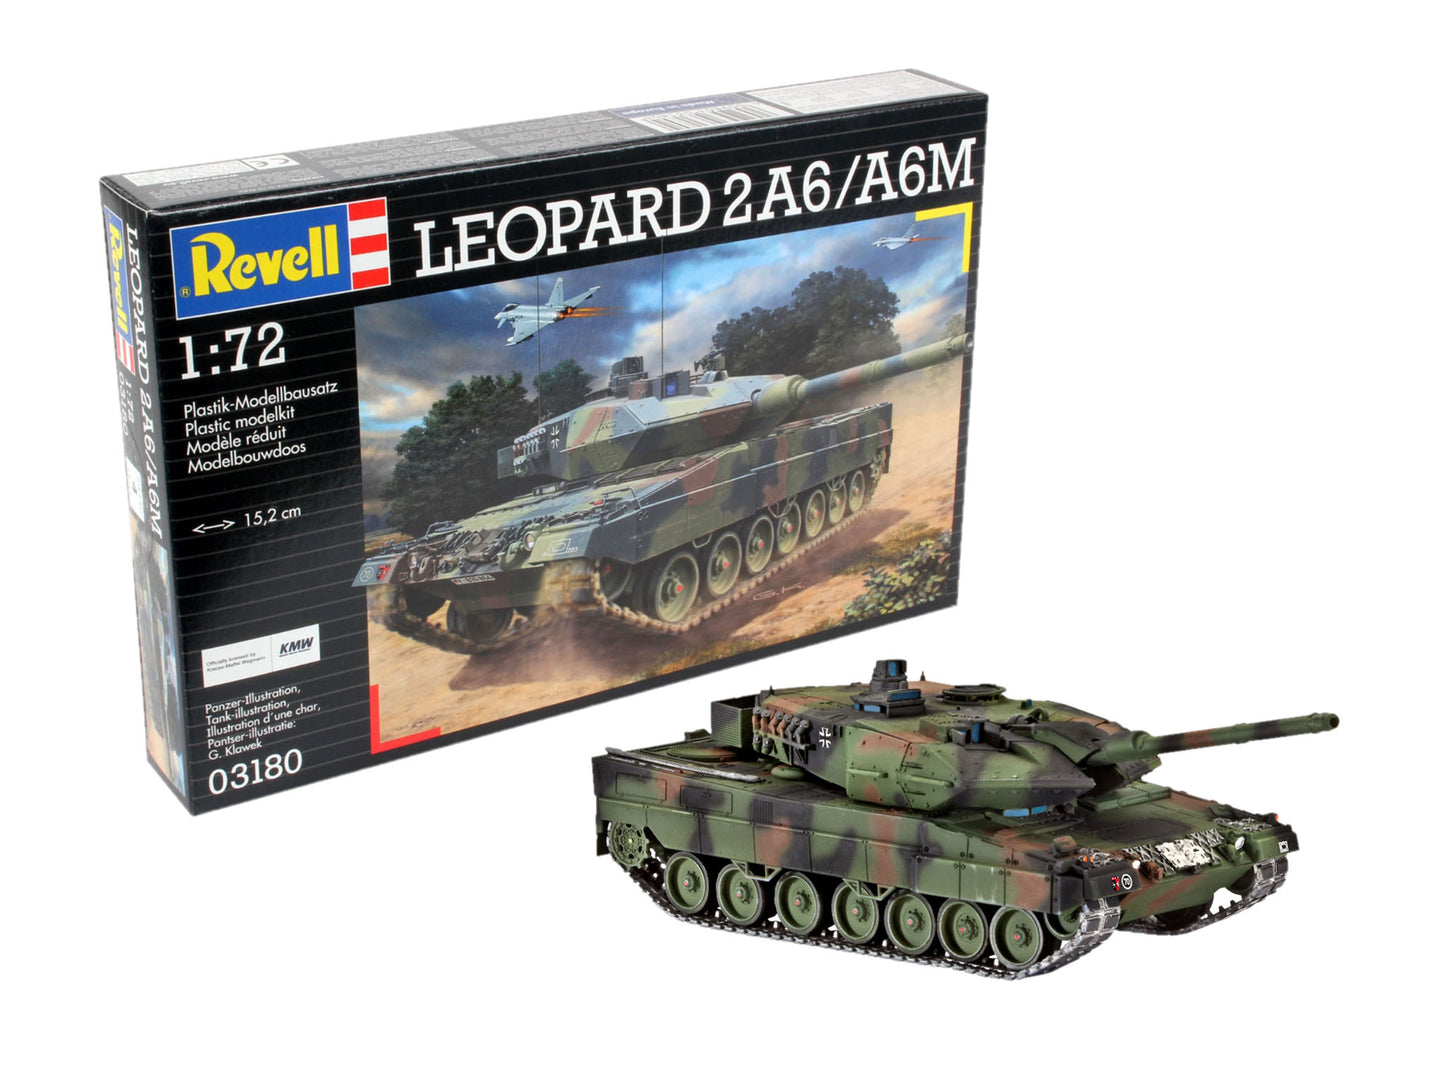 Revell 1/72nd scale Leopard 2 A6/A6M